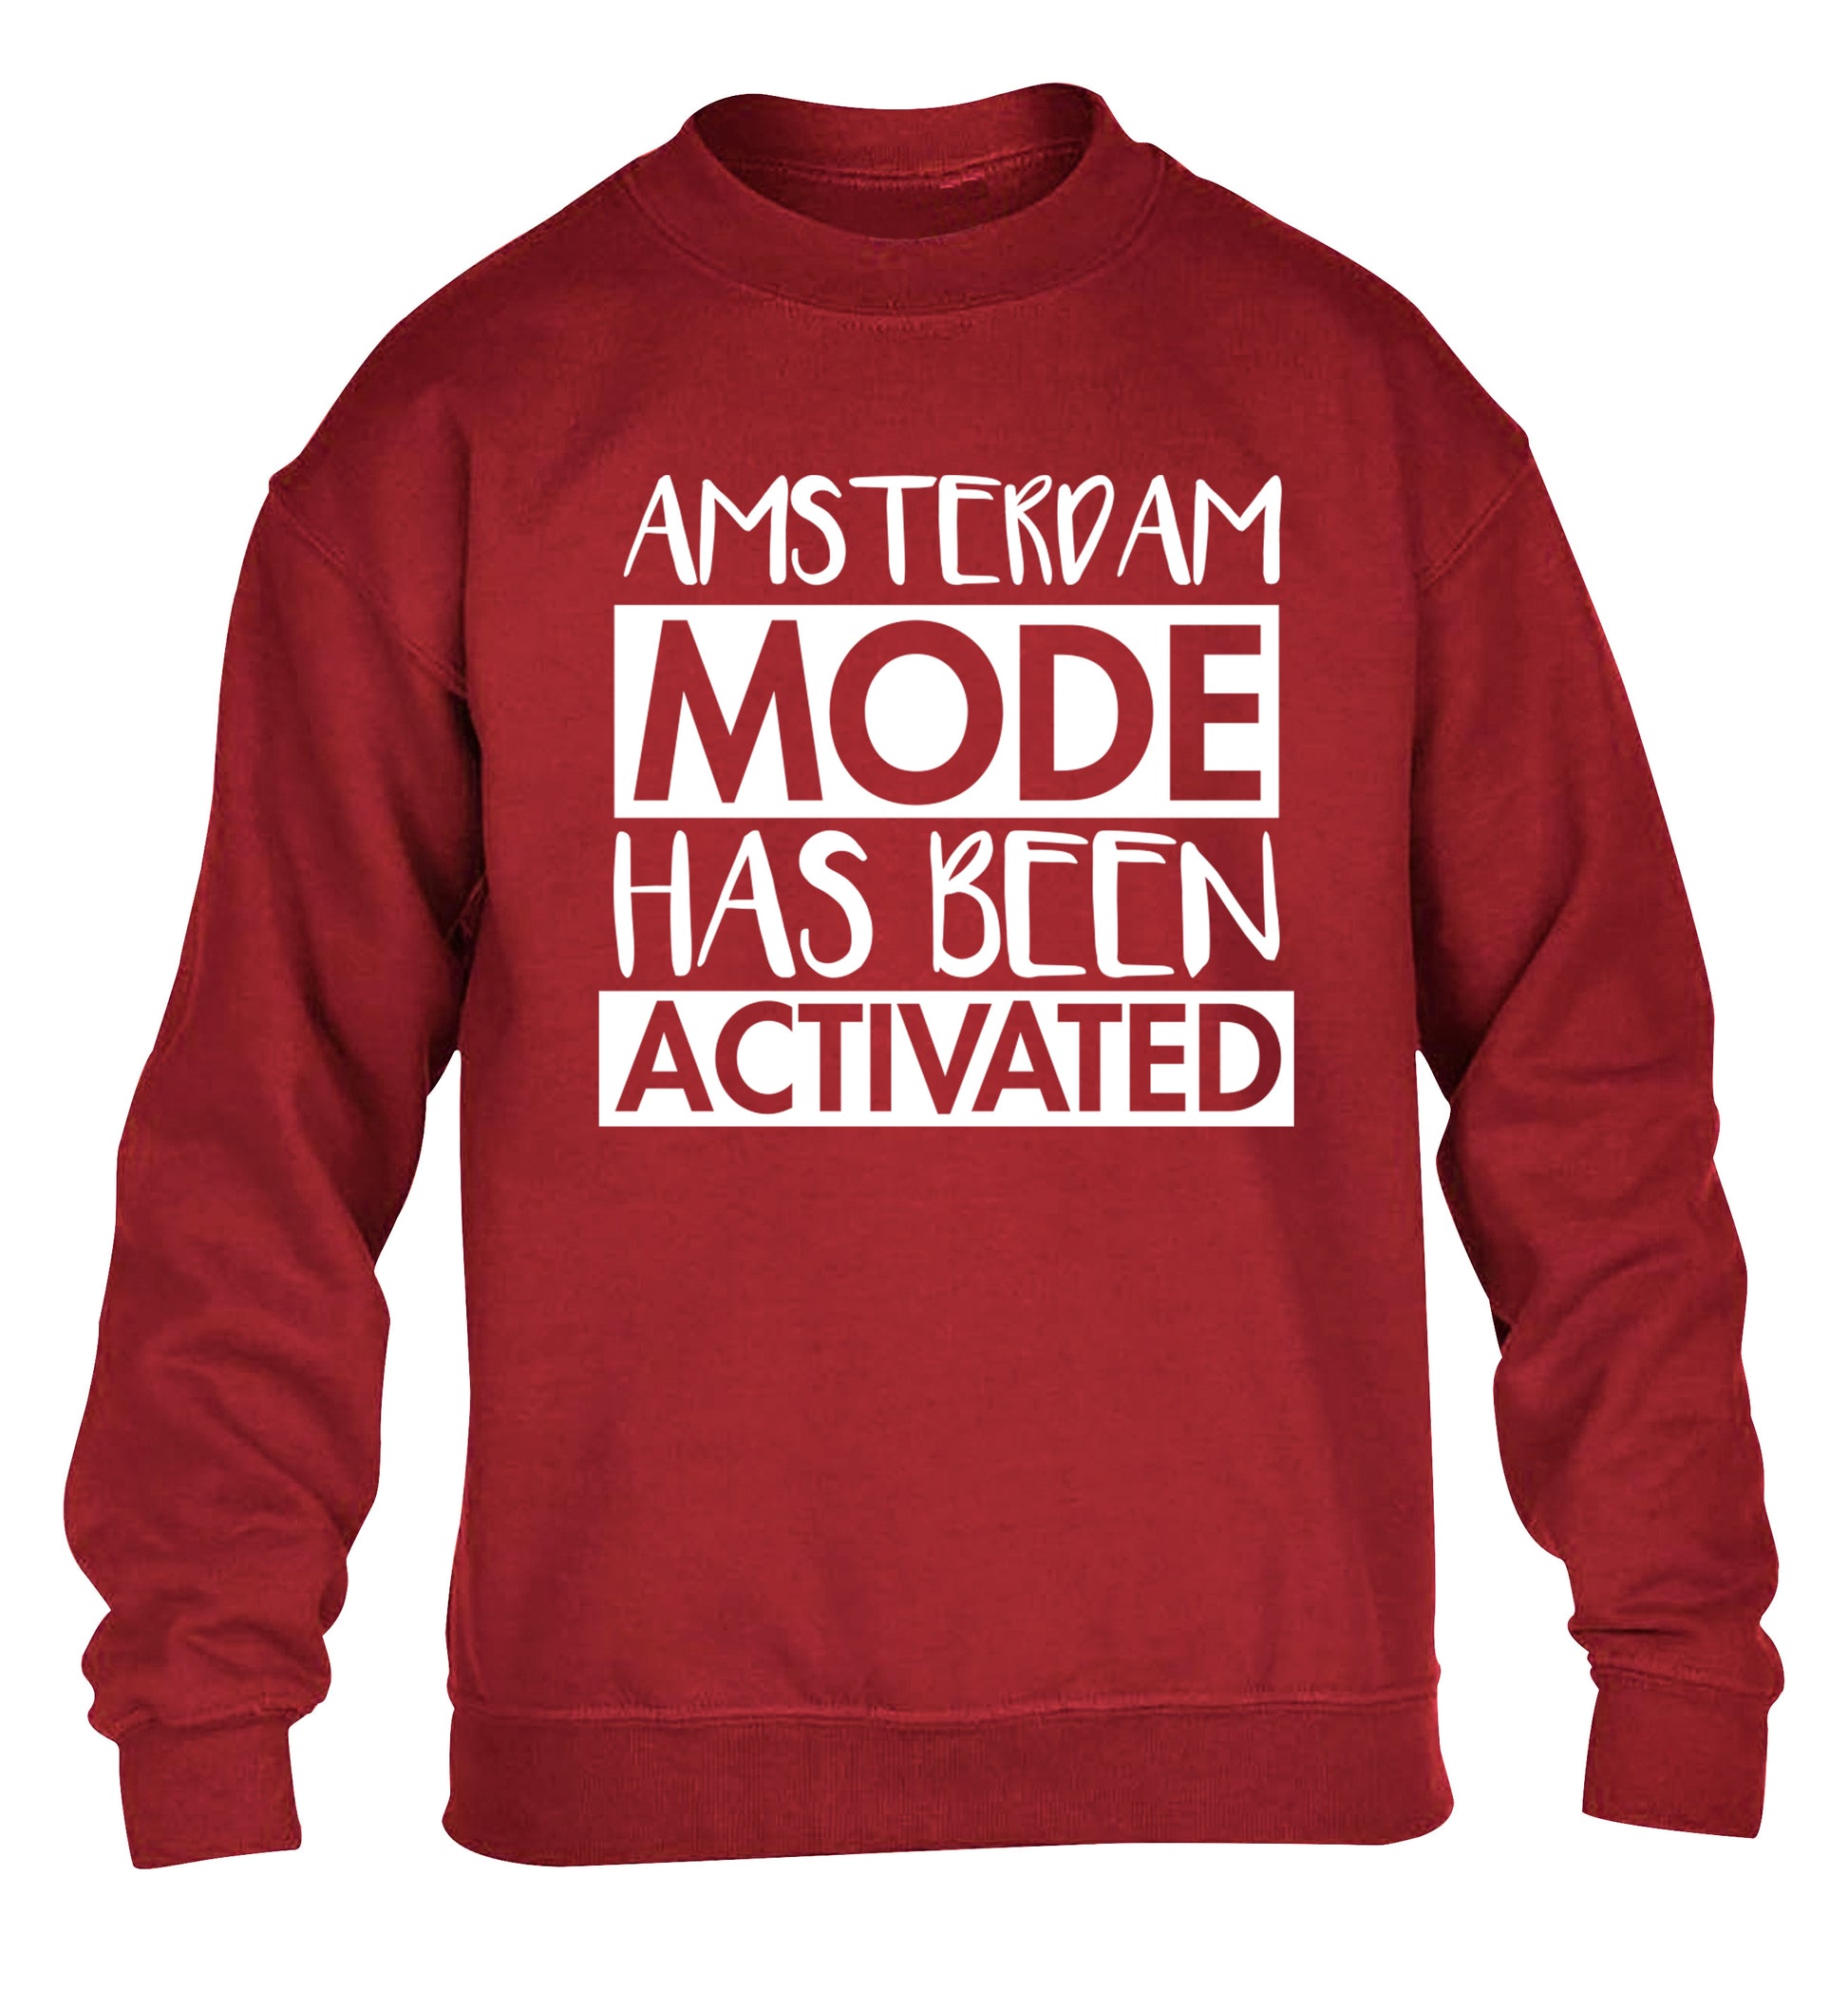 Amsterdam mode has been activated children's grey sweater 12-13 Years